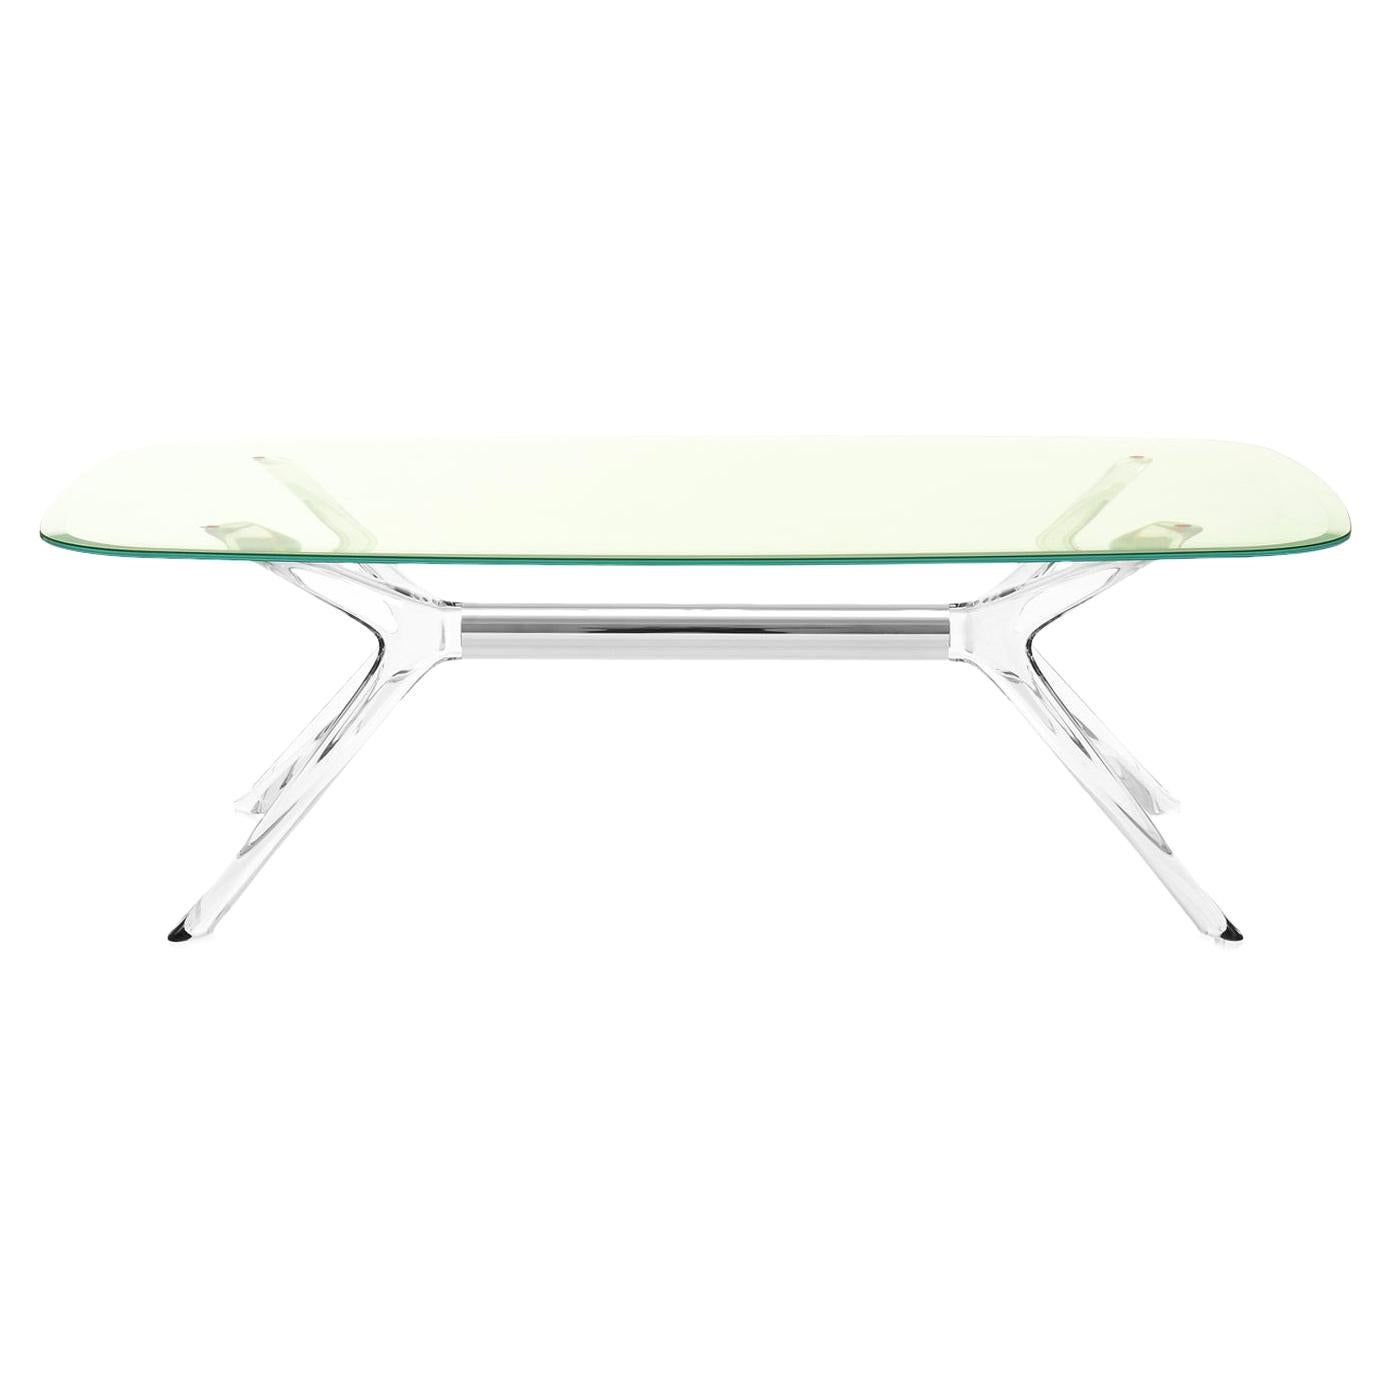 Kartell Blast Rectangle Table in Chrome with Green Top by Philippe Starck